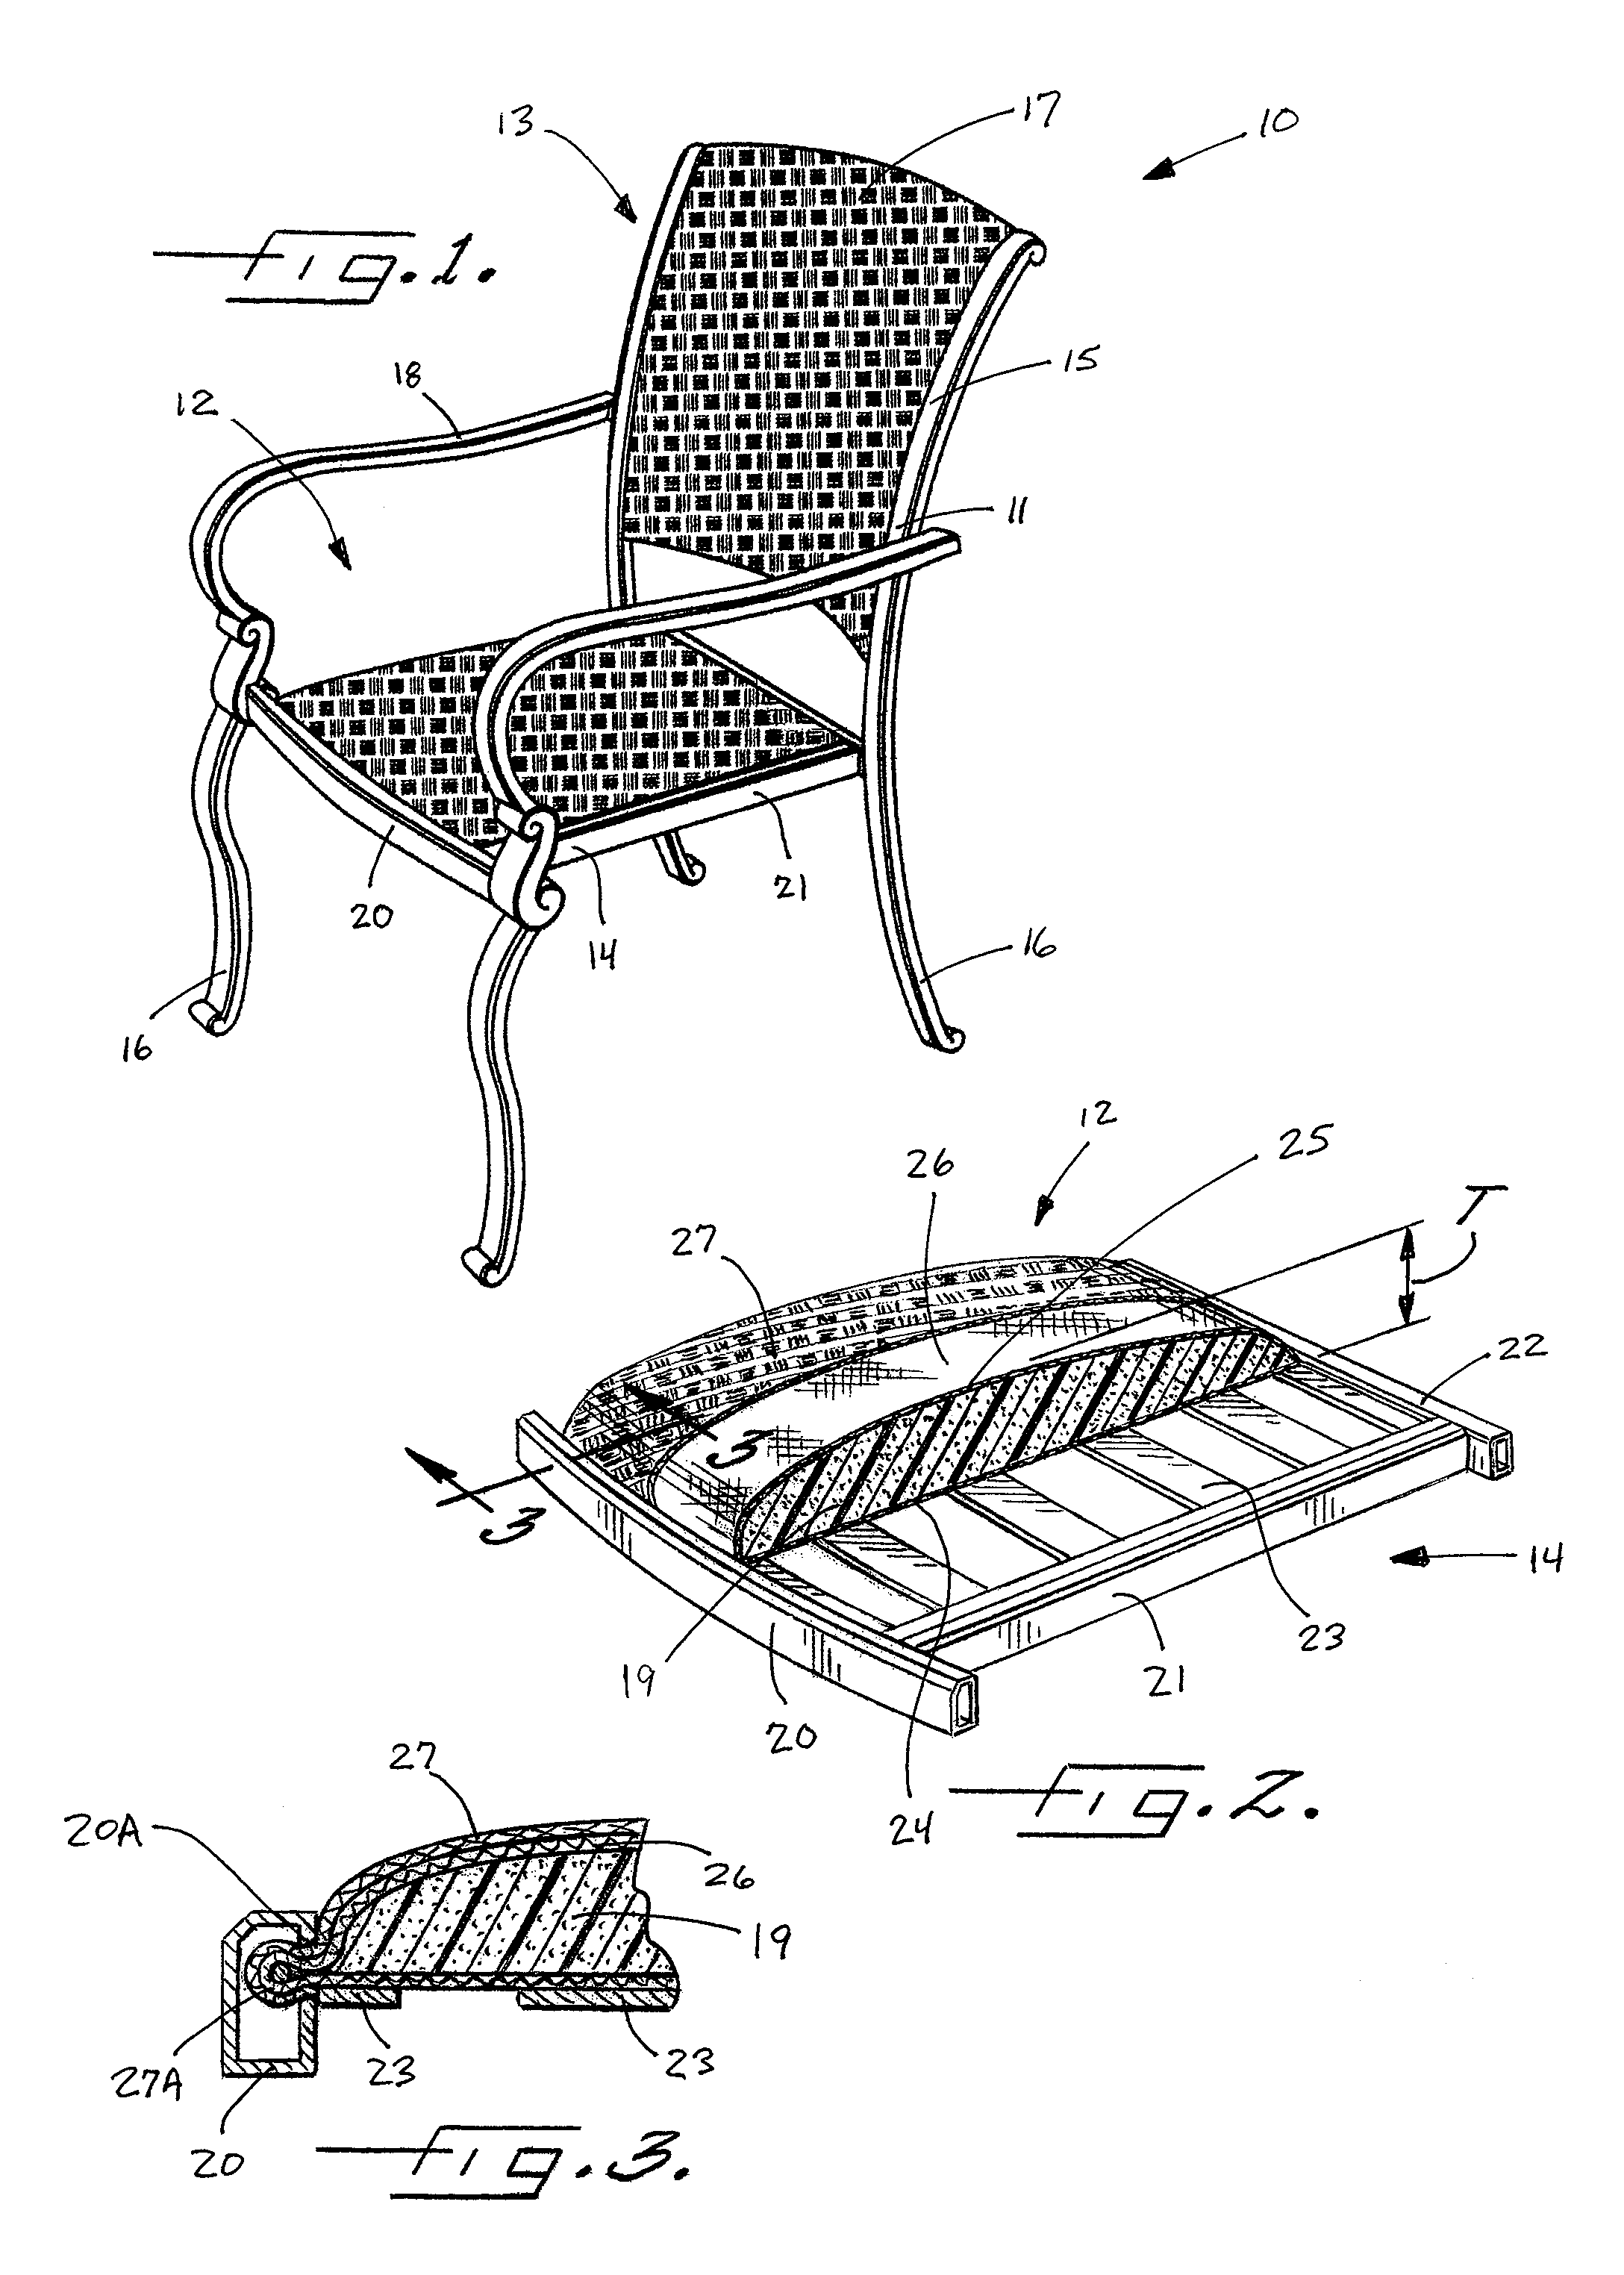 Article of rattan furniture having a seat support cushion